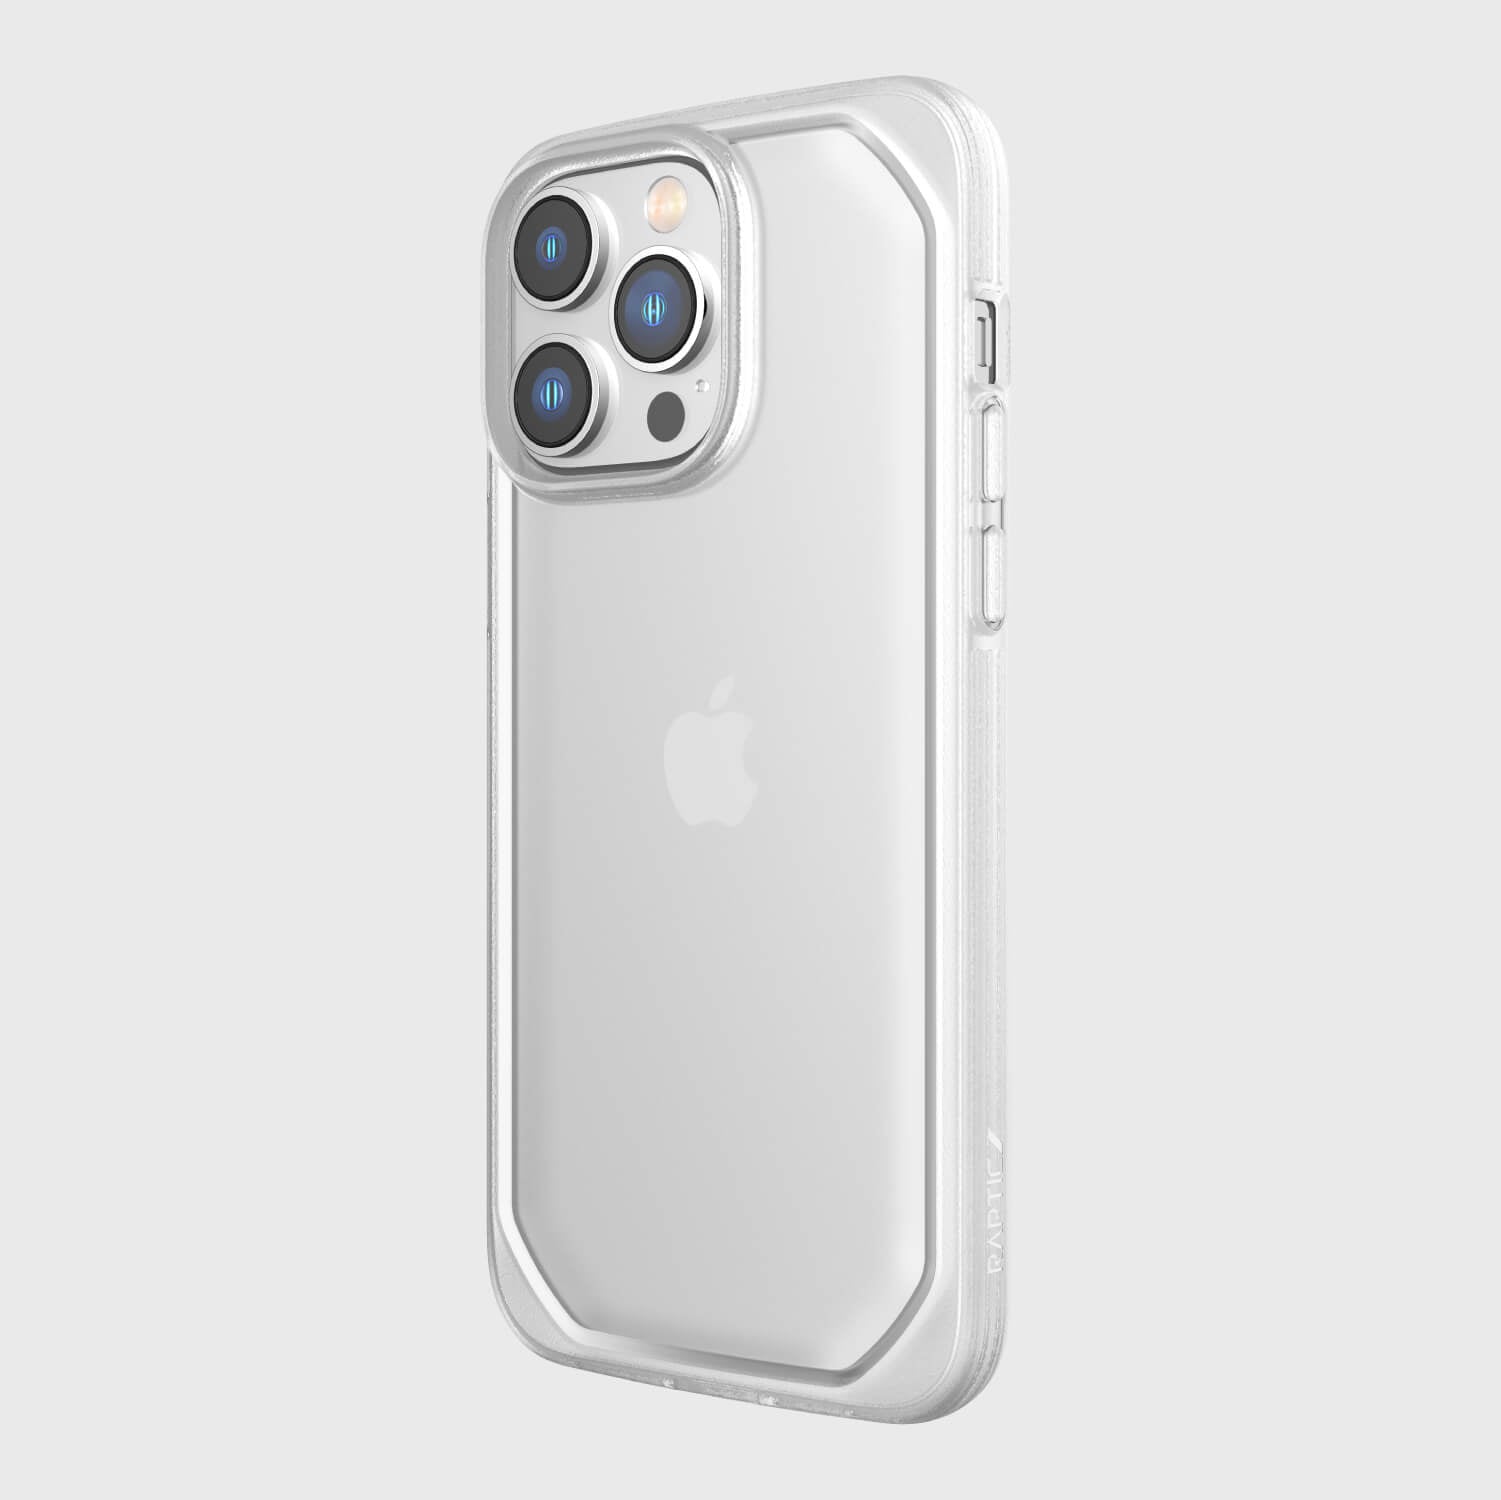 The slim white iPhone 14 Pro Max case - Raptic Slim & Sleek with an environmentally friendly design and texturing depth.